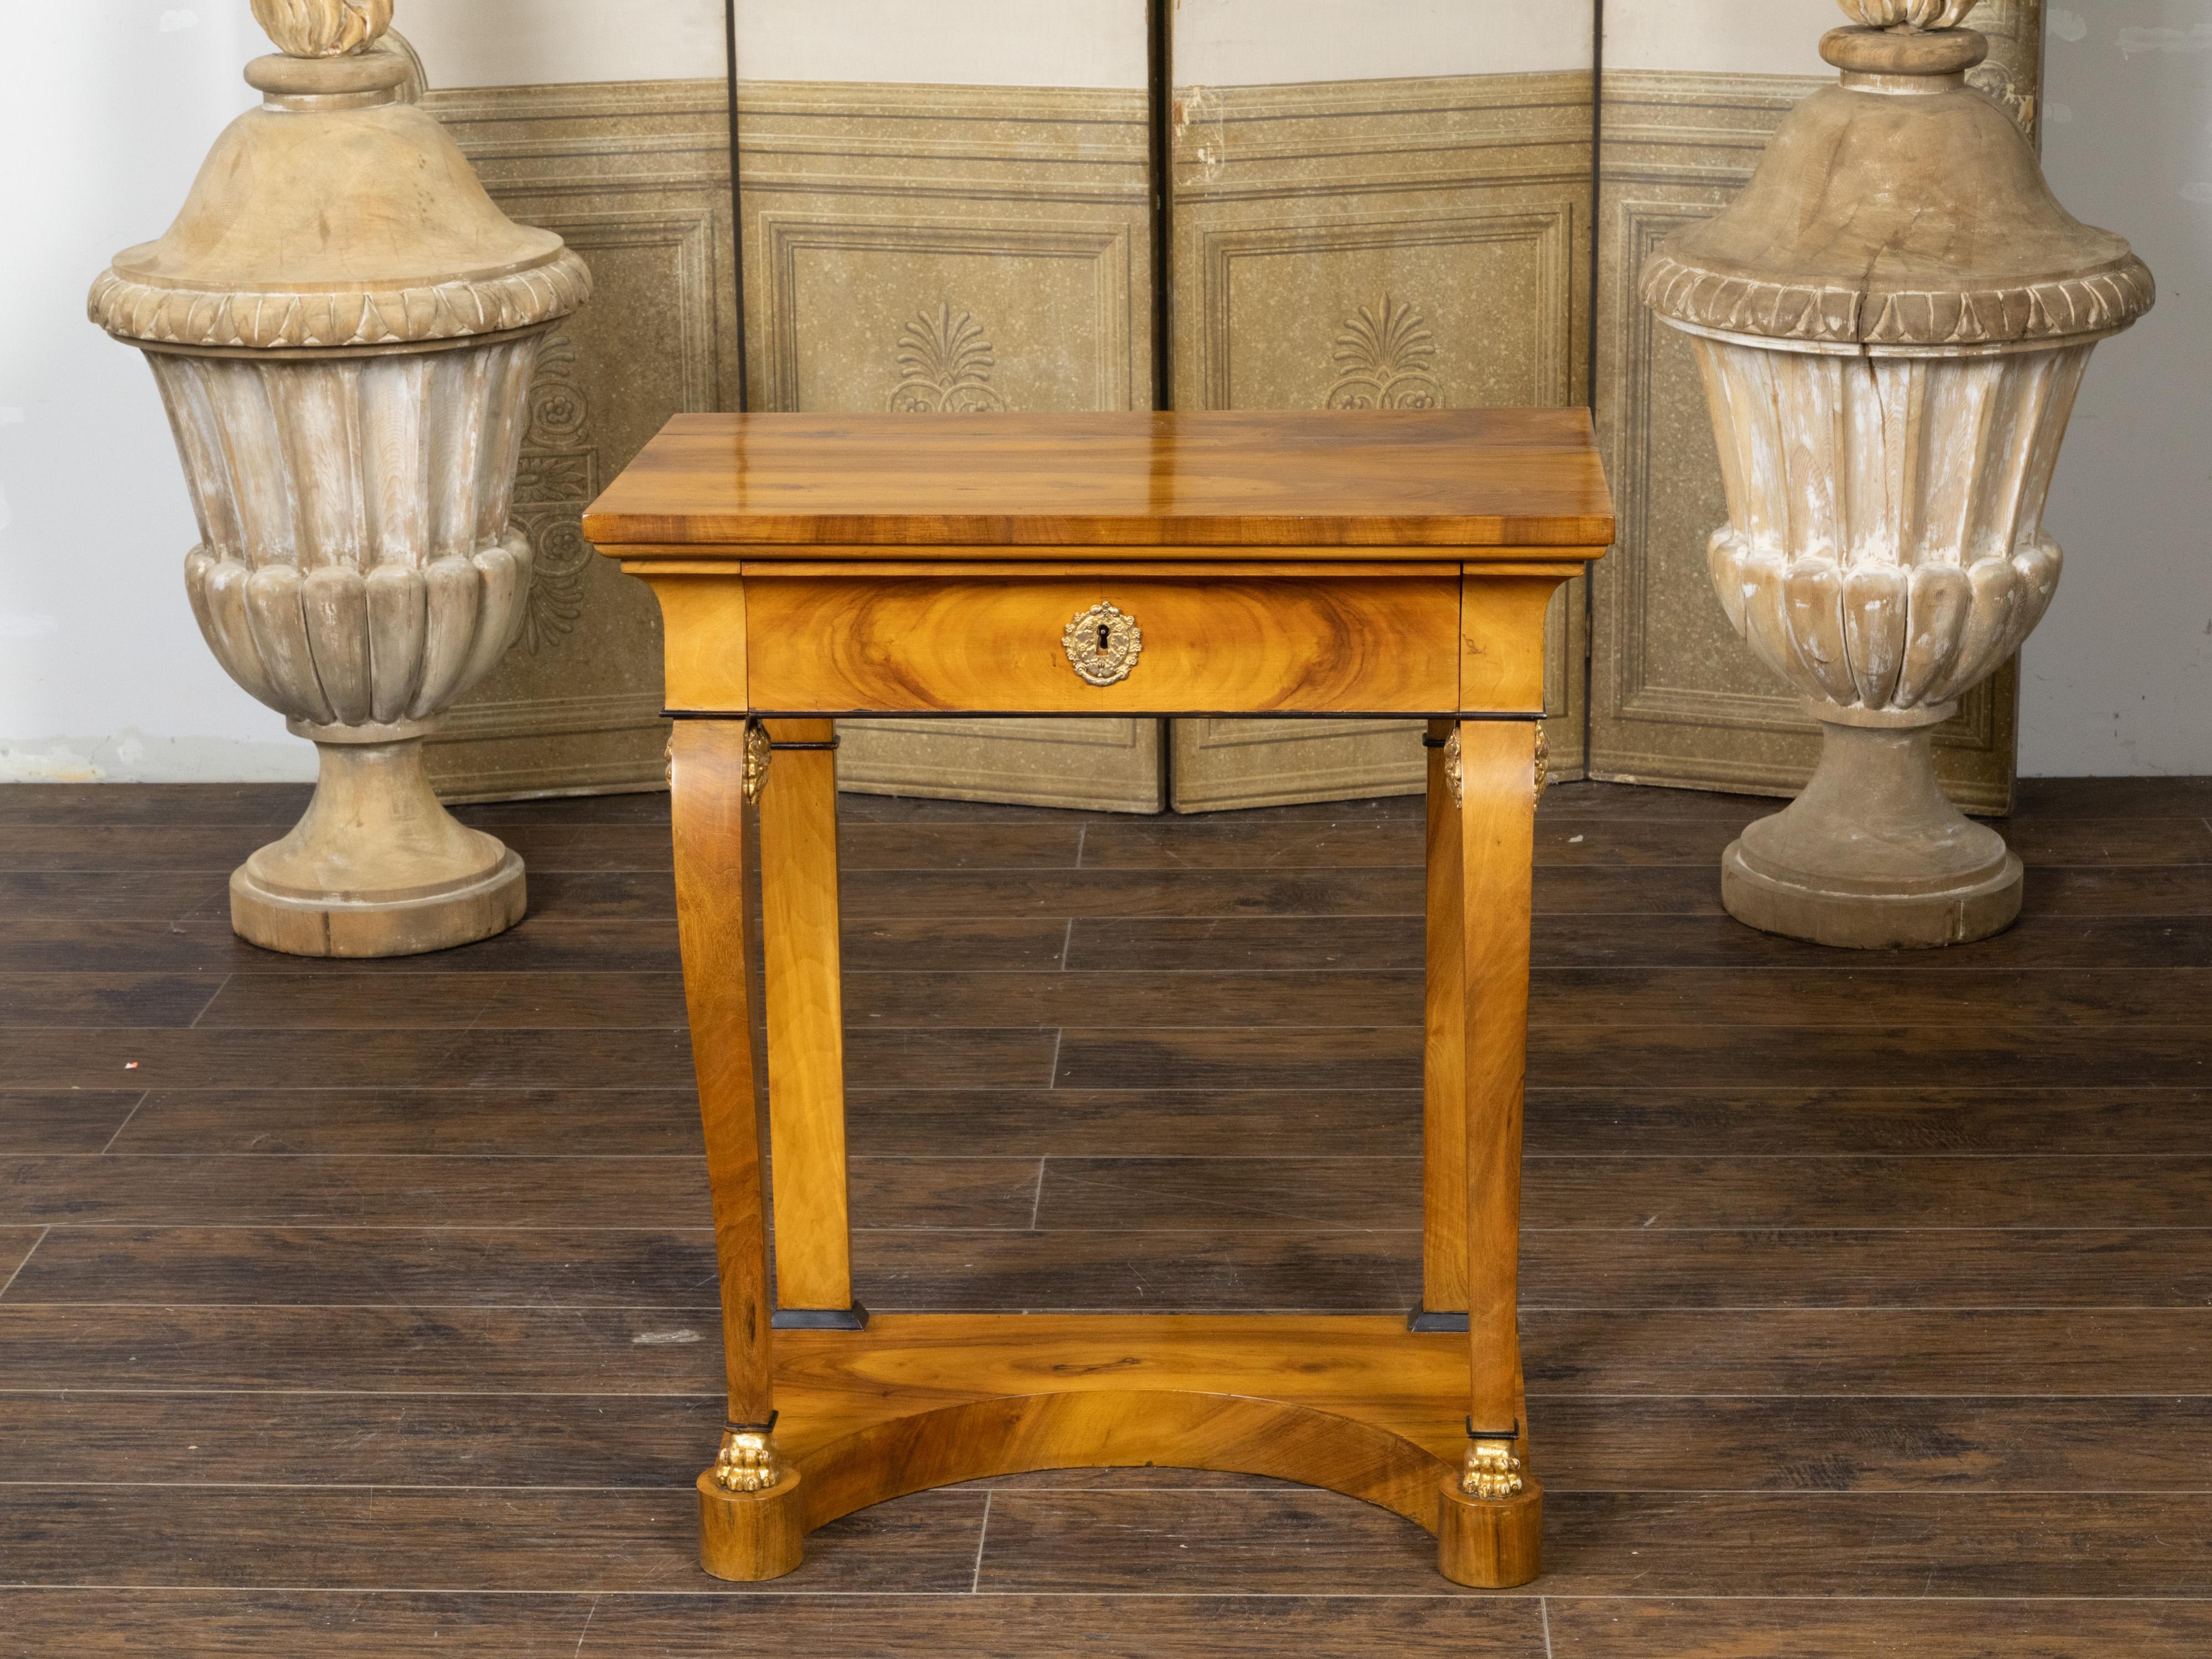 An Austrian Biedermeier period walnut console table from the 19th century, with single drawer, scrolling legs, lion paw feet, low shelf and carved rosettes. Created in Austria during the Biedermeier period, this walnut console table features a